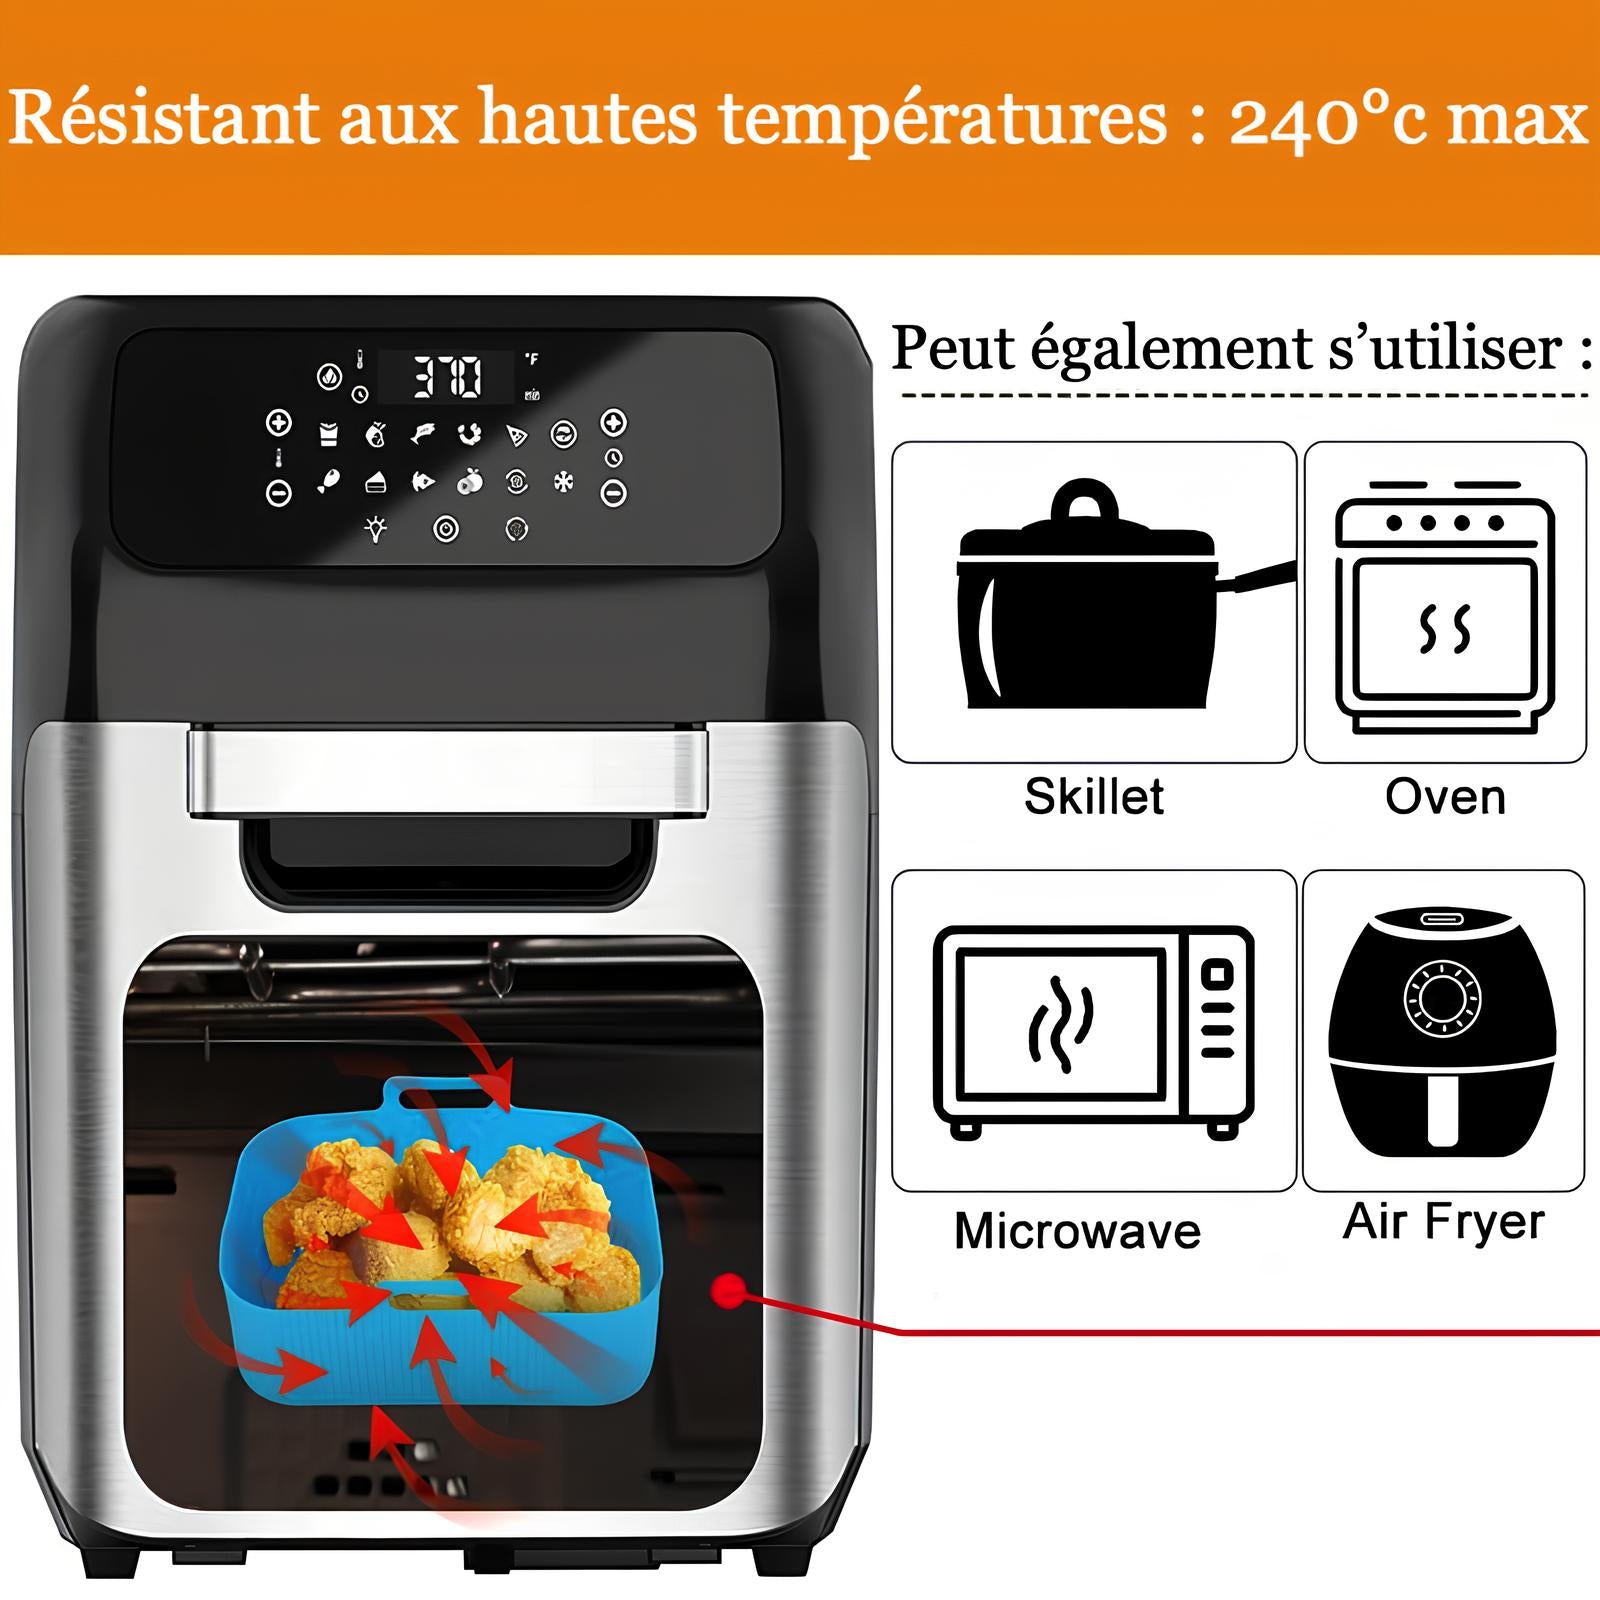 Moule rectangulaire en silicone pour friteuse à air - Airfryer - UstensilesCulinaires